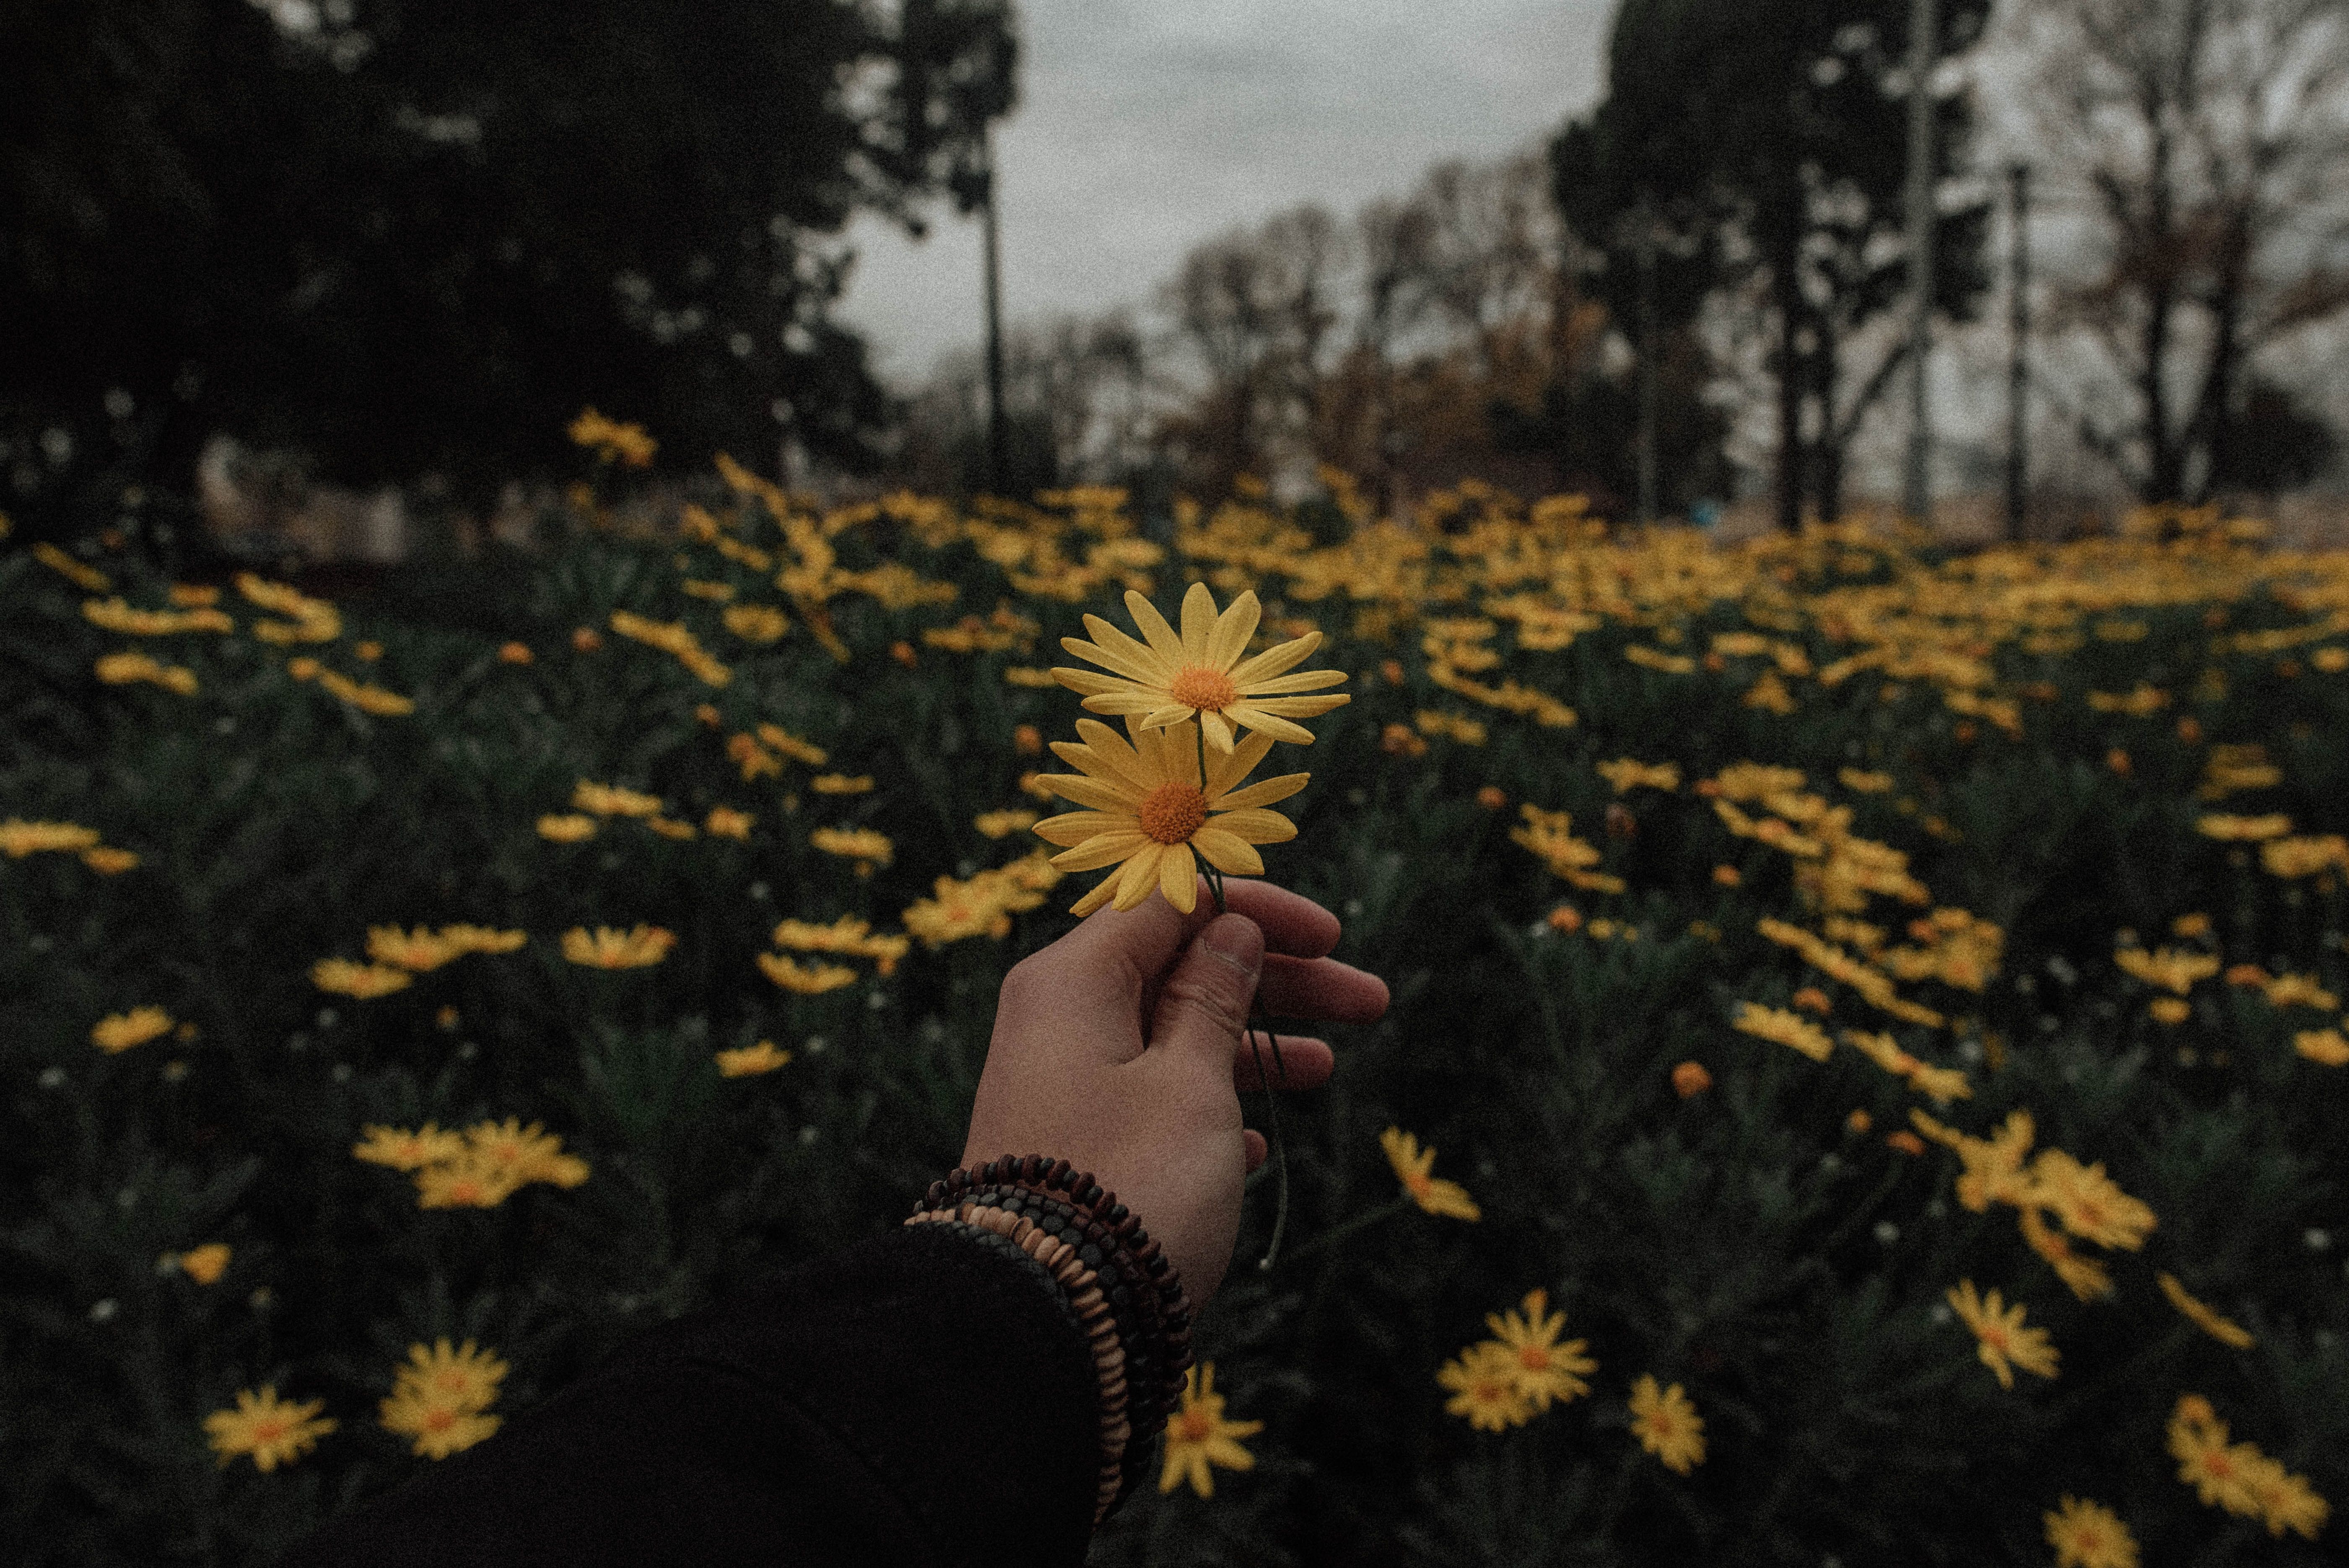 A person holding up some flowers in their hand - Scenery, daisy, vintage fall, vintage, landscape